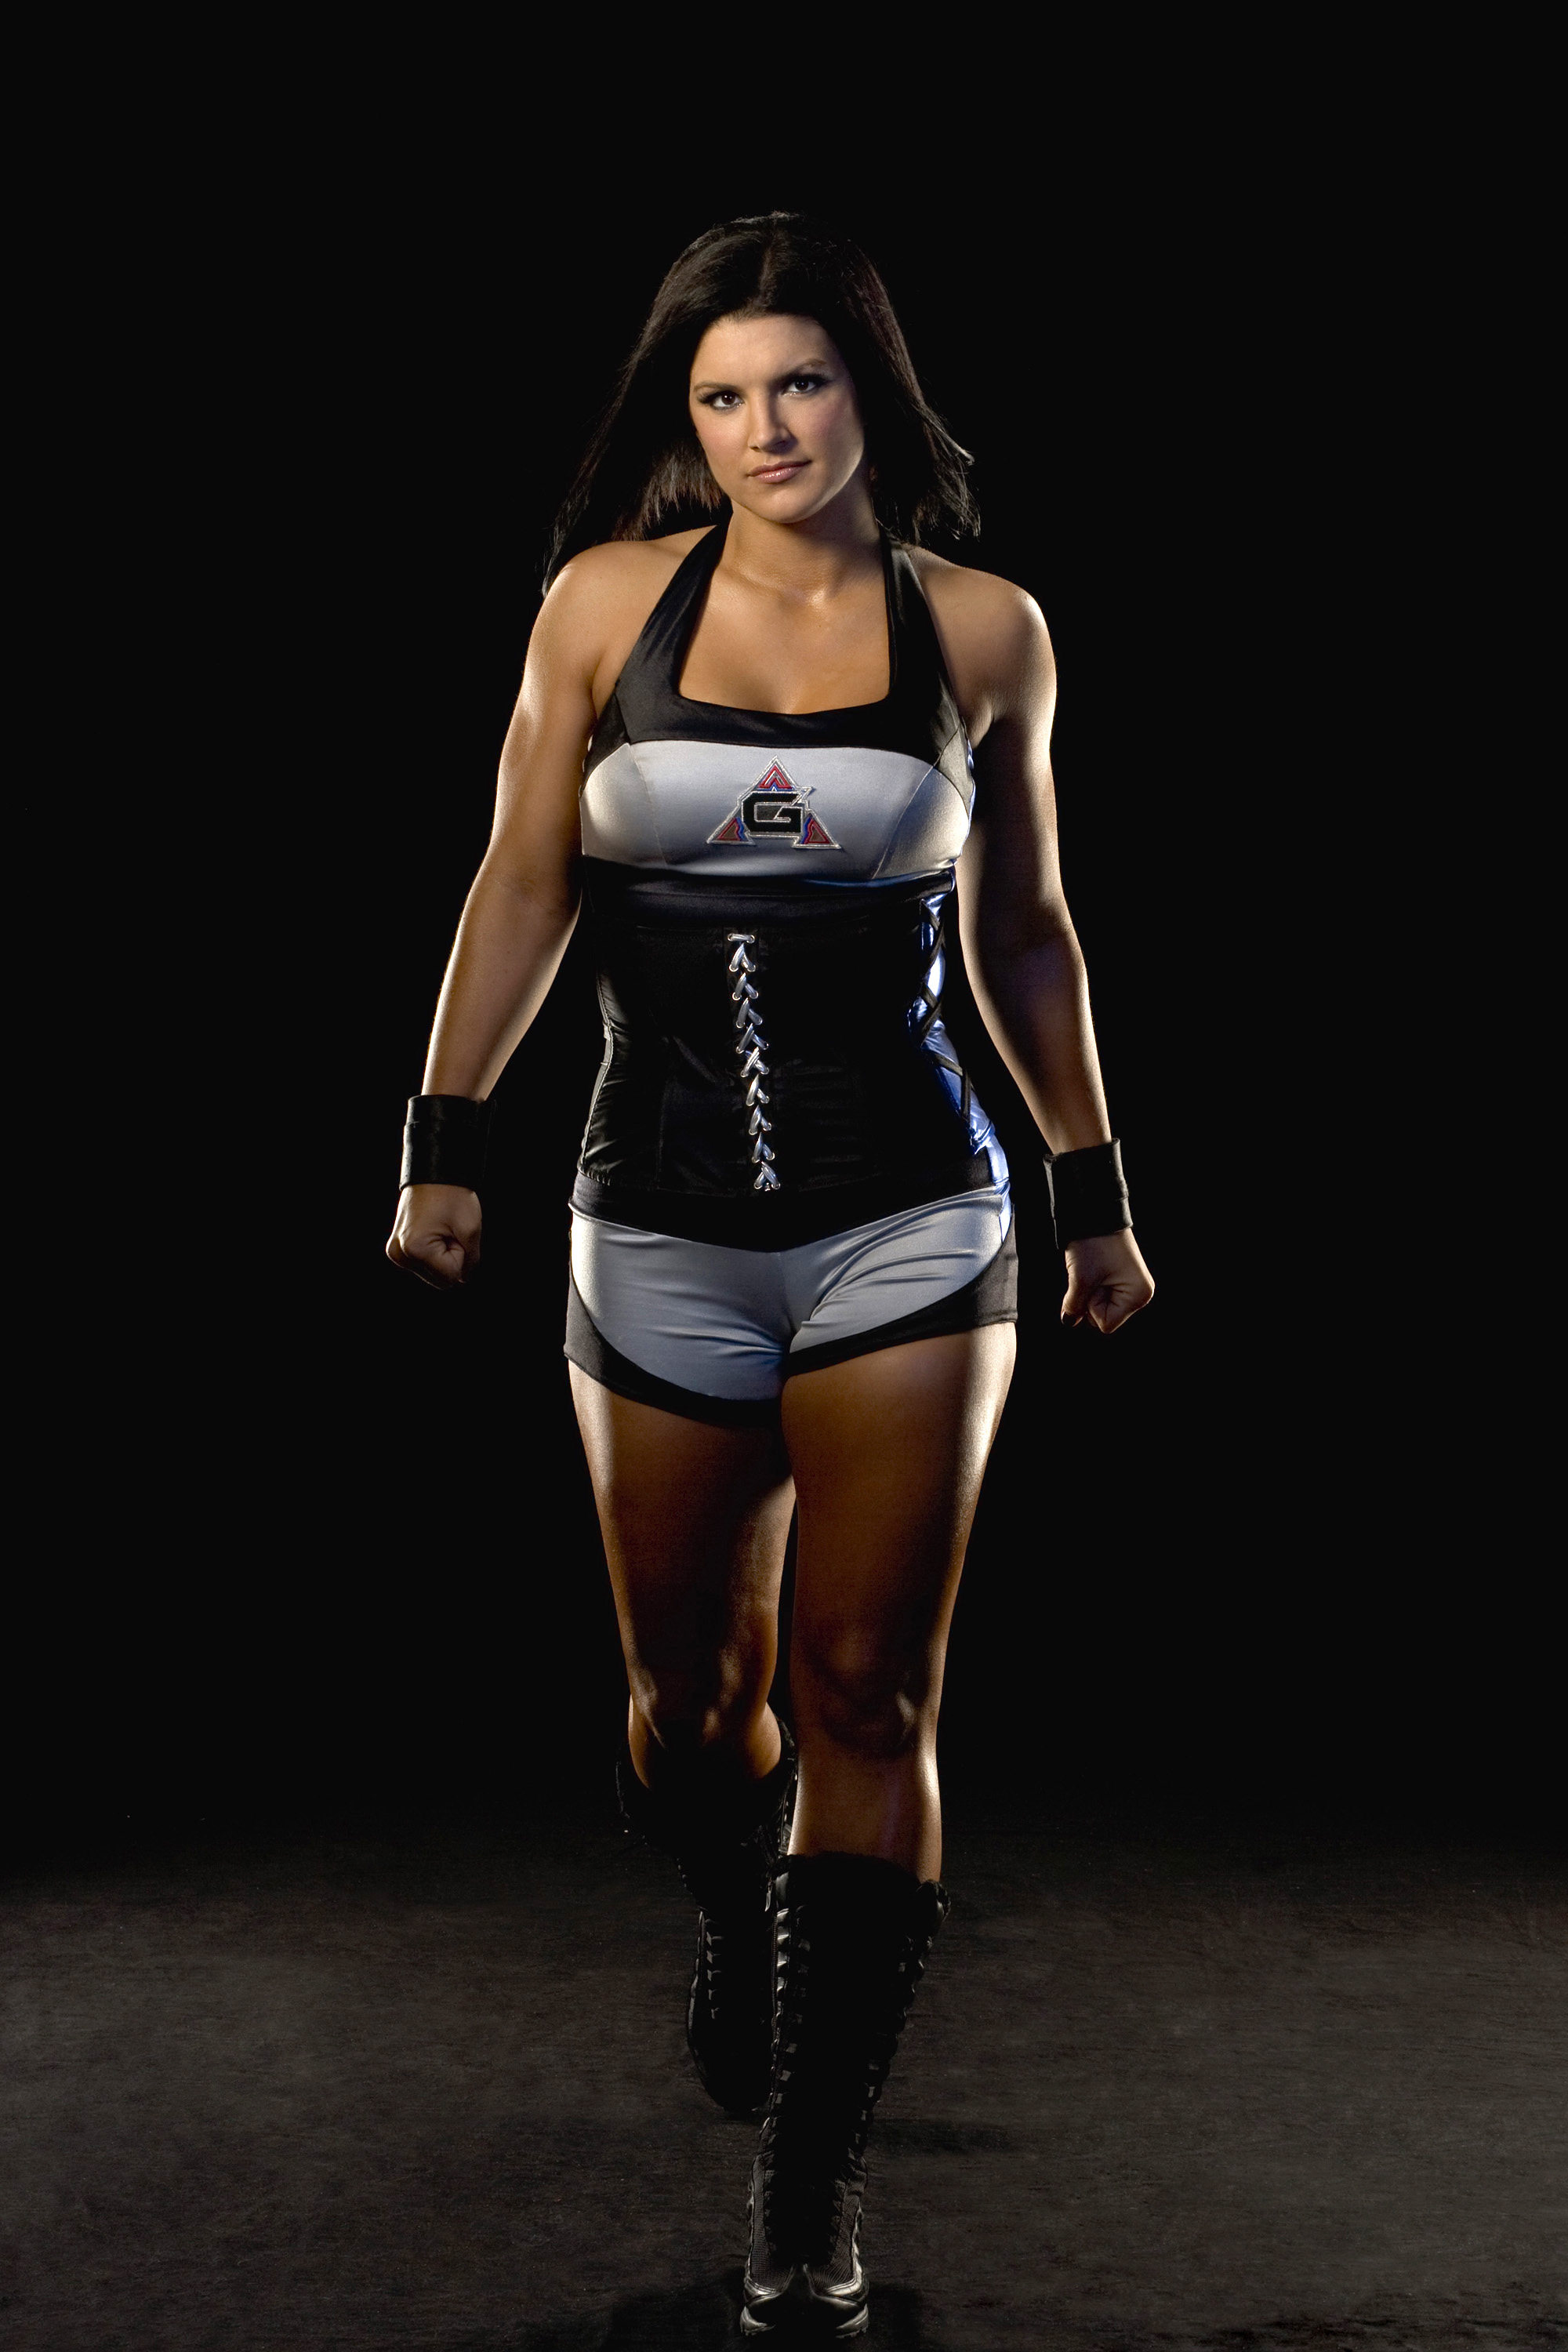 75+ Hottest Pictures Of Gina Carano Who Plays Angel Dust In Deadpool Movies | Best Of Comic Books